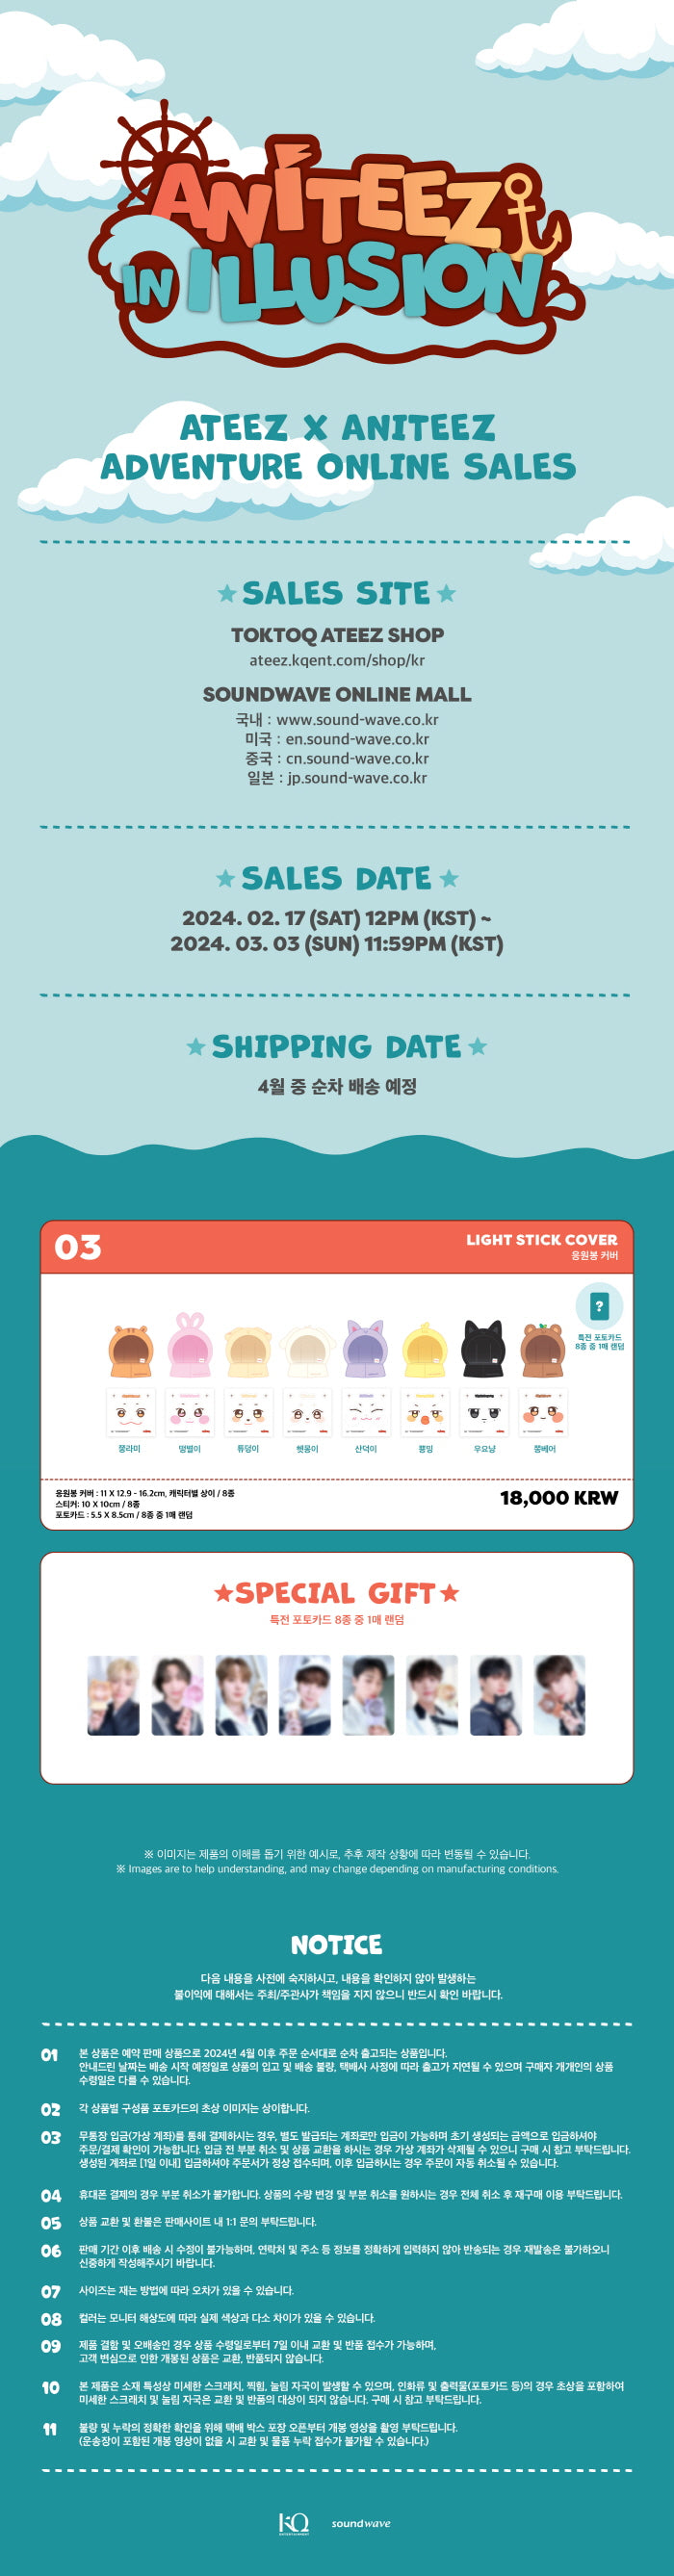 ATEEZ - ANITEEZ IN ILLUSION OFFICIAL MD LIGHTSTICK COVER Infographic